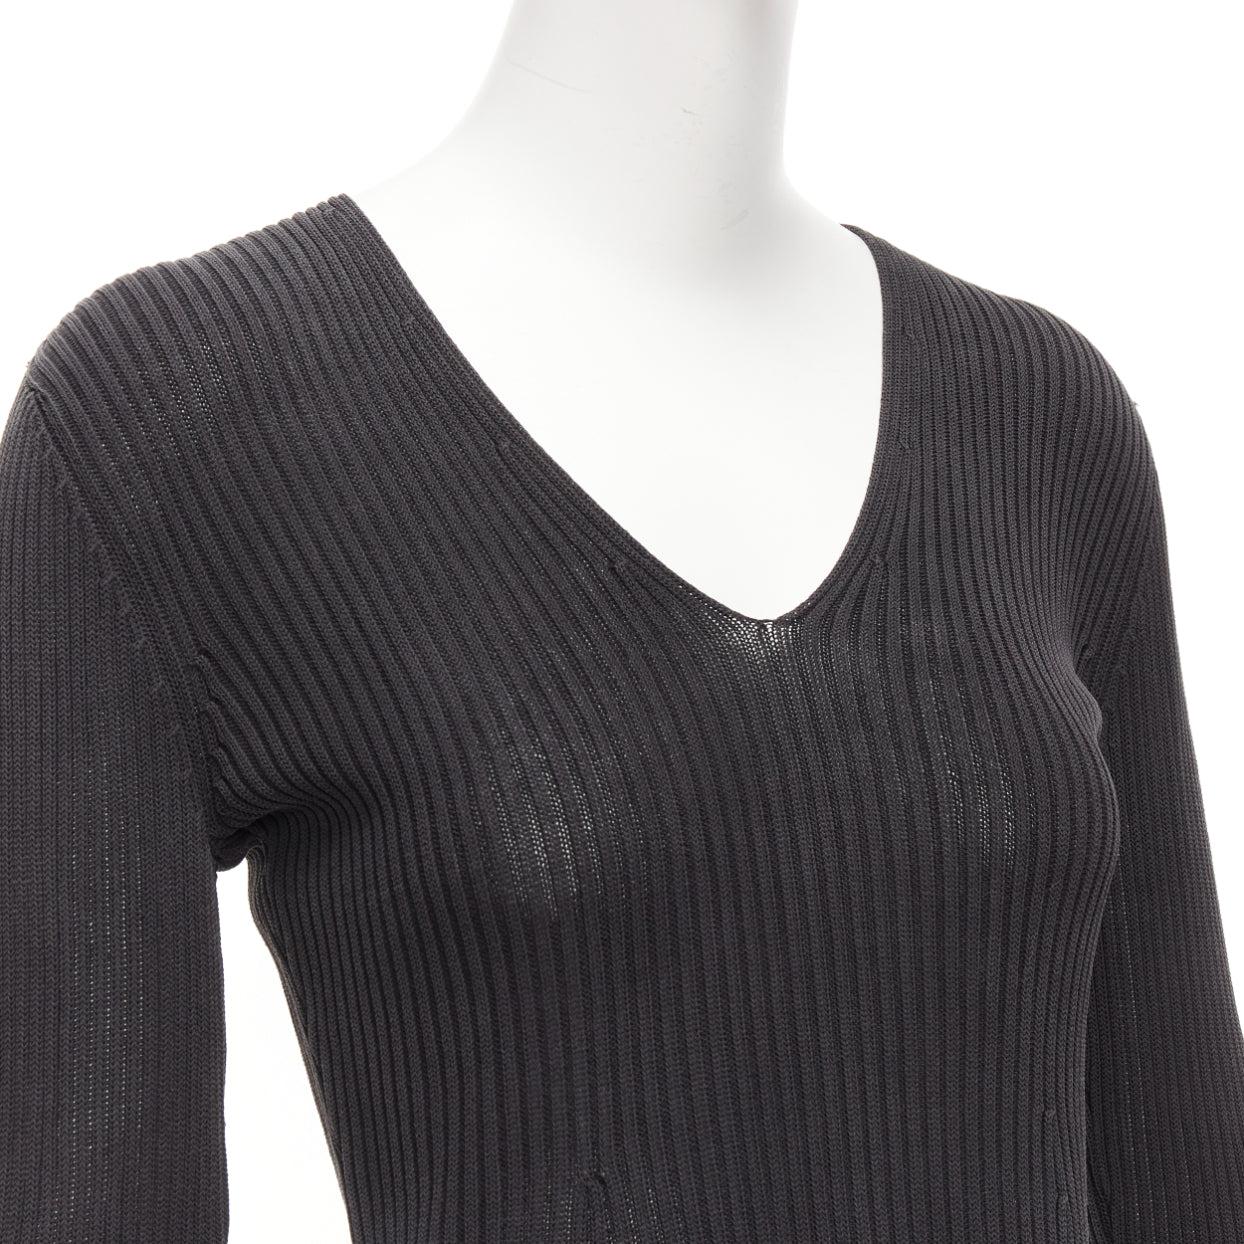 PRADA black 100% silk classic minimal ribbed Vneck long sleeve top IT42 M
Reference: GIYG/A00254
Brand: Prada
Designer: Miuccia Prada
Material: Silk
Color: Black
Pattern: Solid
Closure: Pullover
Made in: Italy

CONDITION:
Condition: Excellent, this